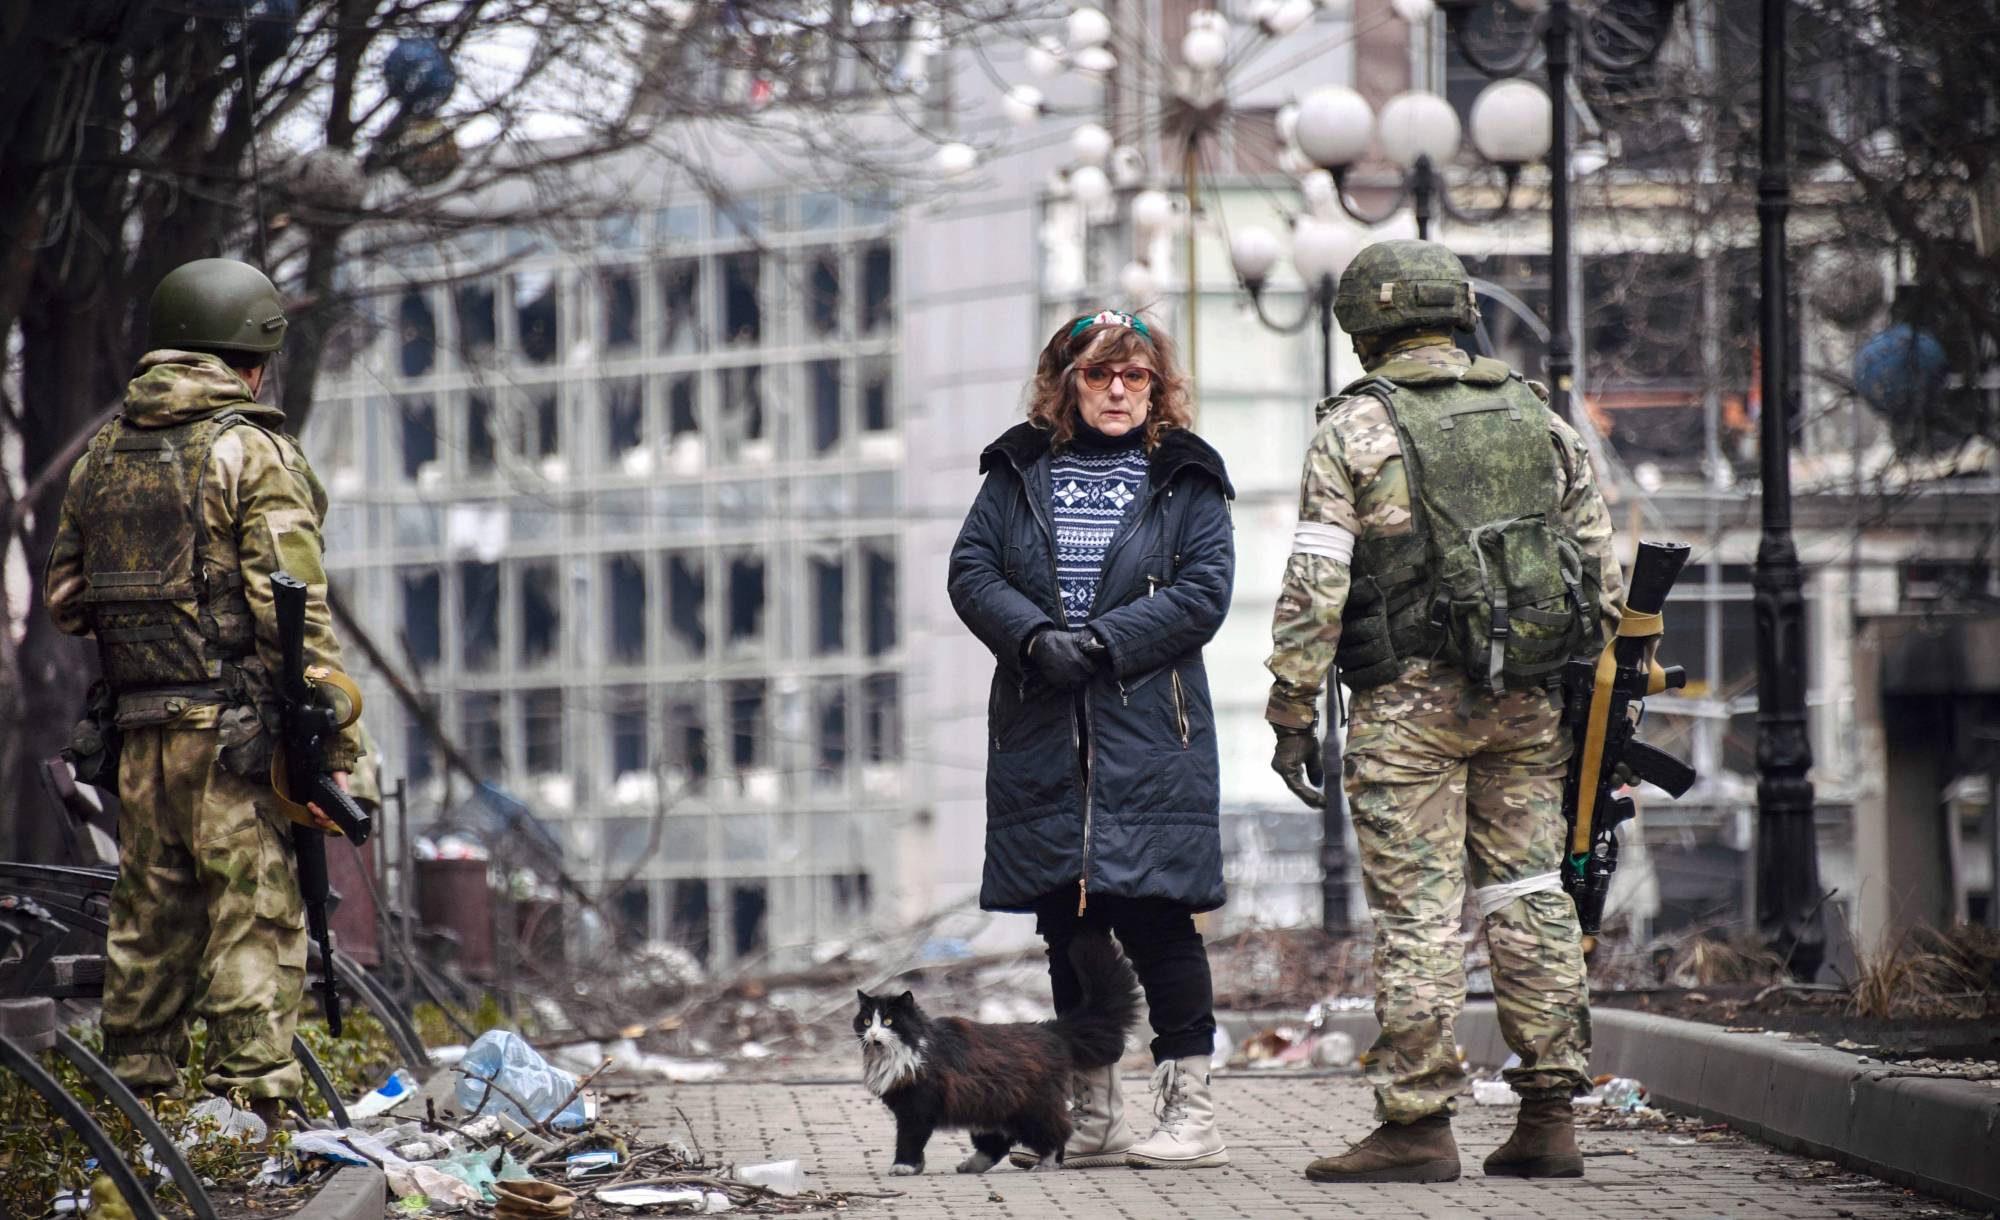 A woman talks with Russian soldiers in Mariupol, Ukraine, on April 12 as Russian troops intensify a campaign to take the strategic port city. | AFP-JIJI